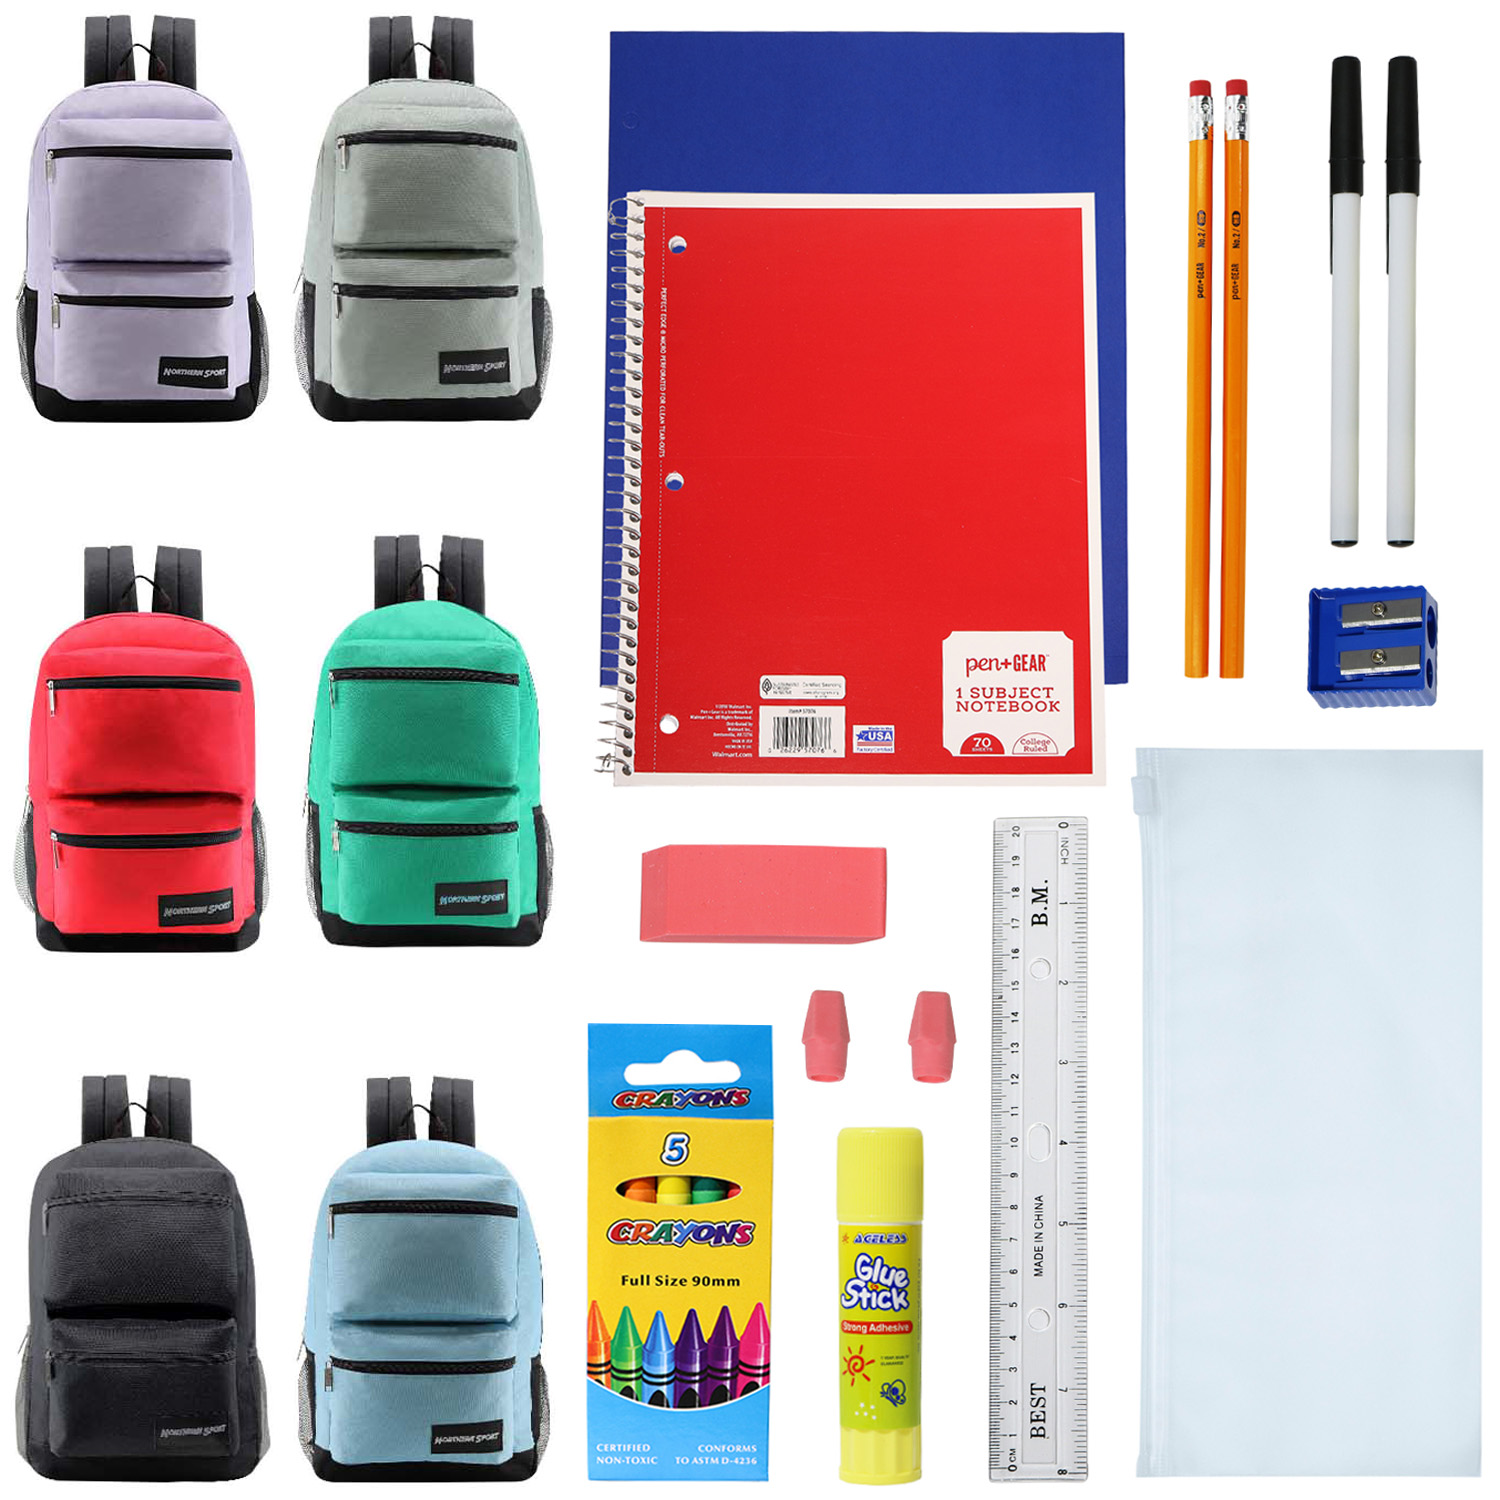 ''17'''' Dual Zippered Sport BACKPACKs w/ 18 PC. Middle School Supply Kits - Assorted Colors''